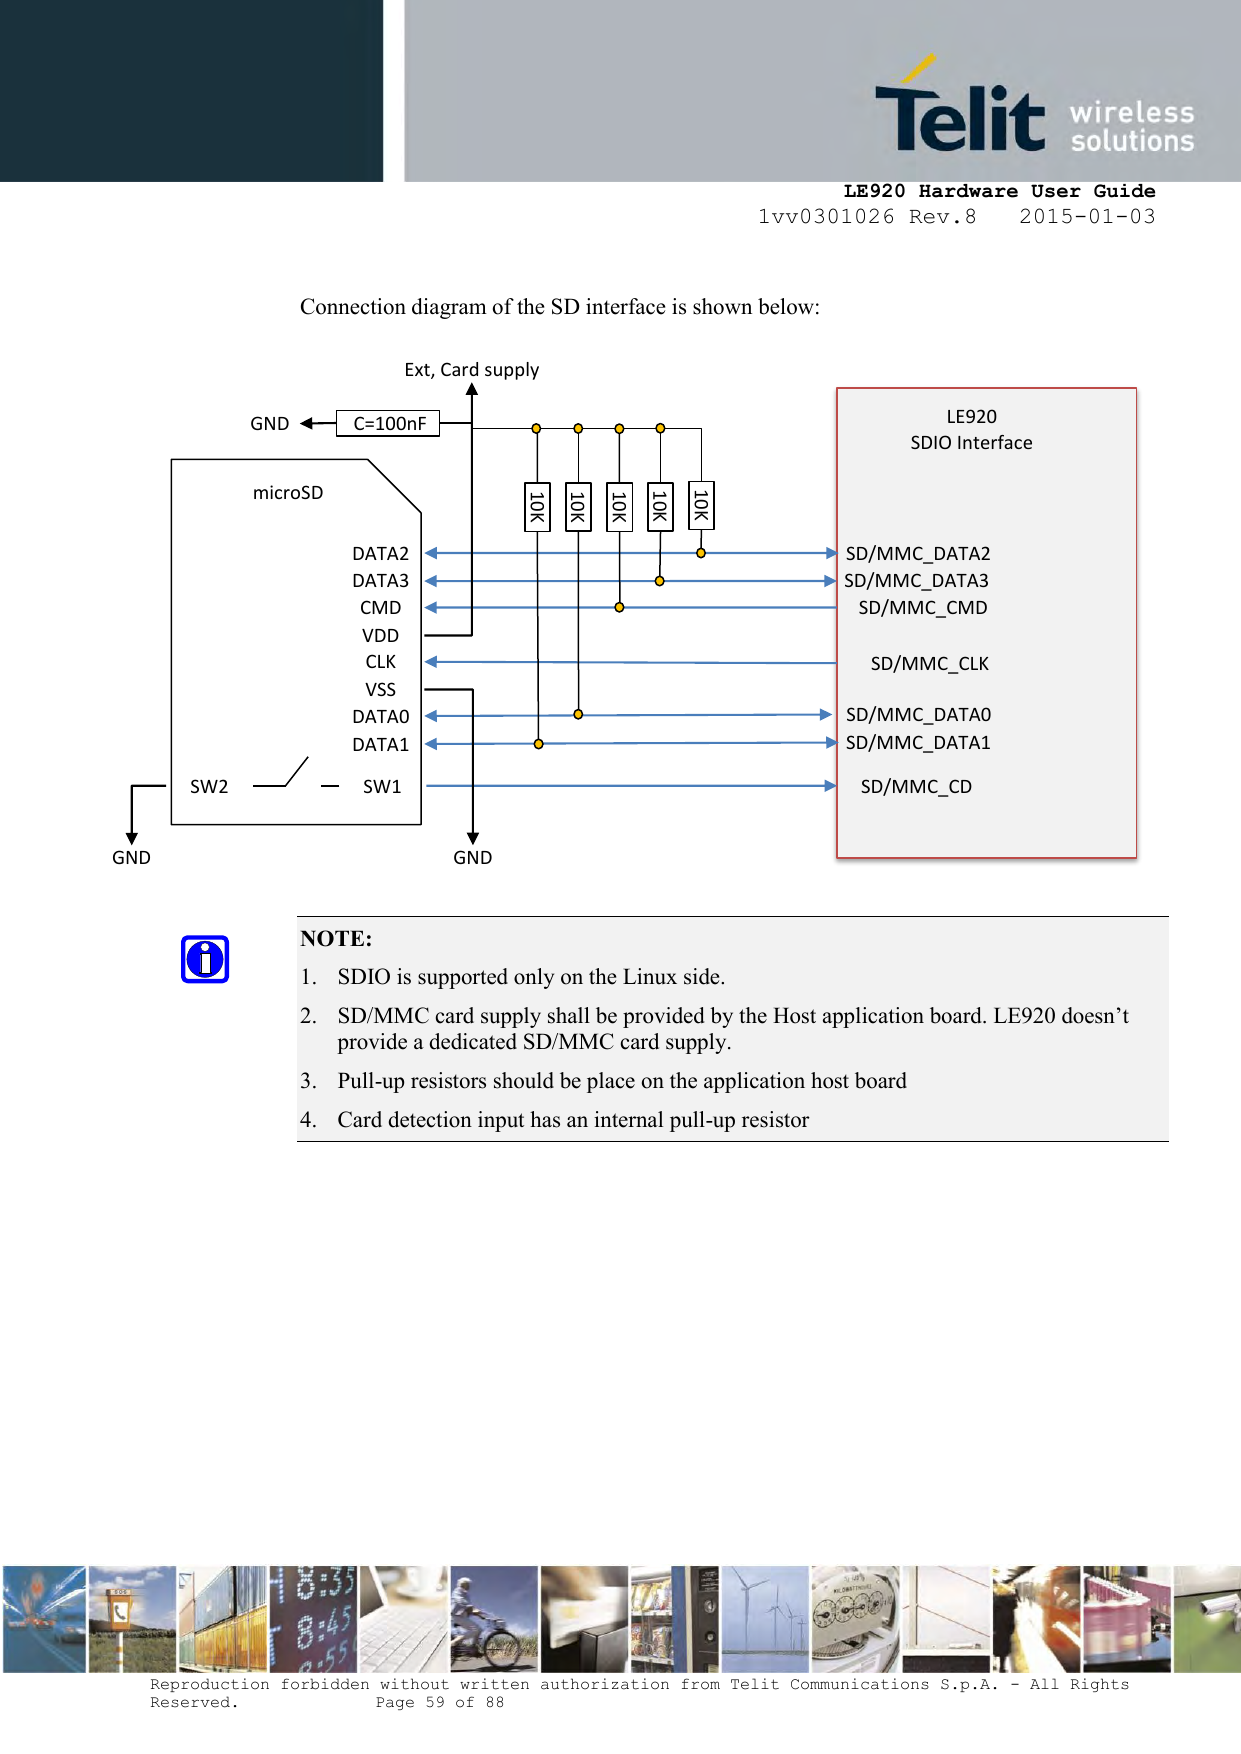     LE920 Hardware User Guide 1vv0301026 Rev.8   2015-01-03 Reproduction forbidden without written authorization from Telit Communications S.p.A. - All Rights Reserved.    Page 59 of 88   Connection diagram of the SD interface is shown below:                NOTE:  1. SDIO is supported only on the Linux side. 2. SD/MMC card supply shall be provided by the Host application board. LE920 doesn’t provide a dedicated SD/MMC card supply. 3. Pull-up resistors should be place on the application host board 4. Card detection input has an internal pull-up resistor    SD/MMC_DATA2 SD/MMC_DATA3 SD/MMC_CMD SD/MMC_CLK SD/MMC_DATA0 SD/MMC_DATA1 LE920 SDIO Interface  SD/MMC_CD Ext, Card supply DATA2 DATA3 CMD VDD CLK VSS DATA0 DATA1 microSD SW1 SW2 GND GND 10K 10K 10K 10K 10K  C=100nF GND 